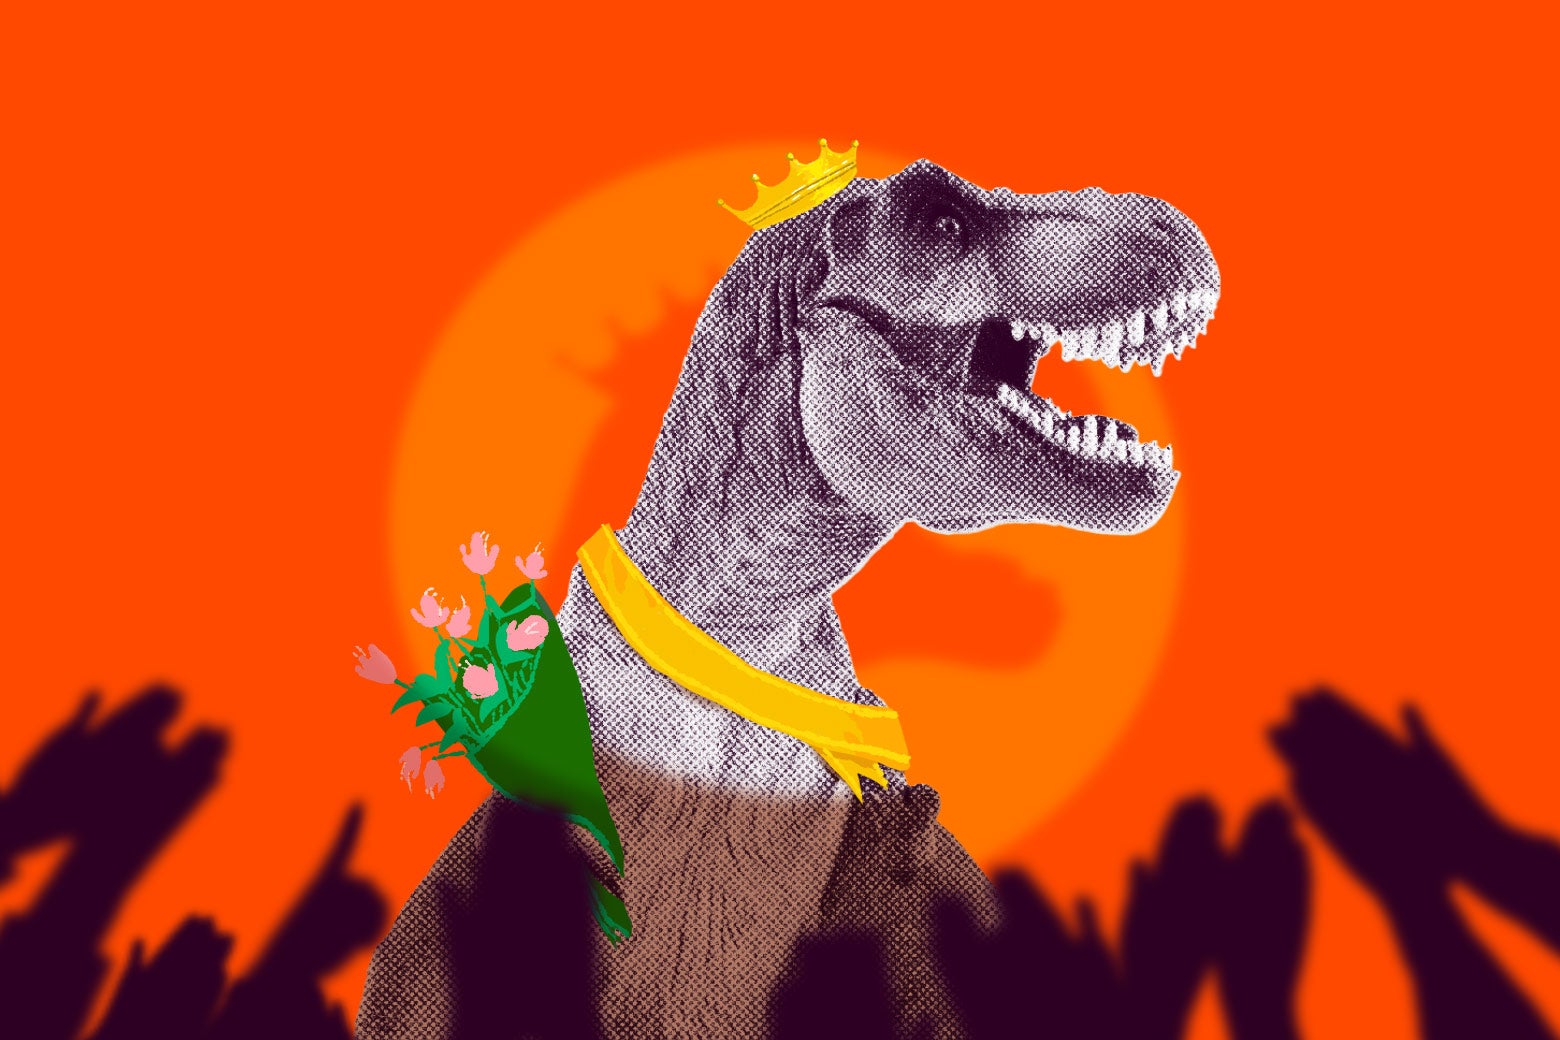 A T. rex with a crown and a sash, holding a bouquet of flowers in front of adoring fans.